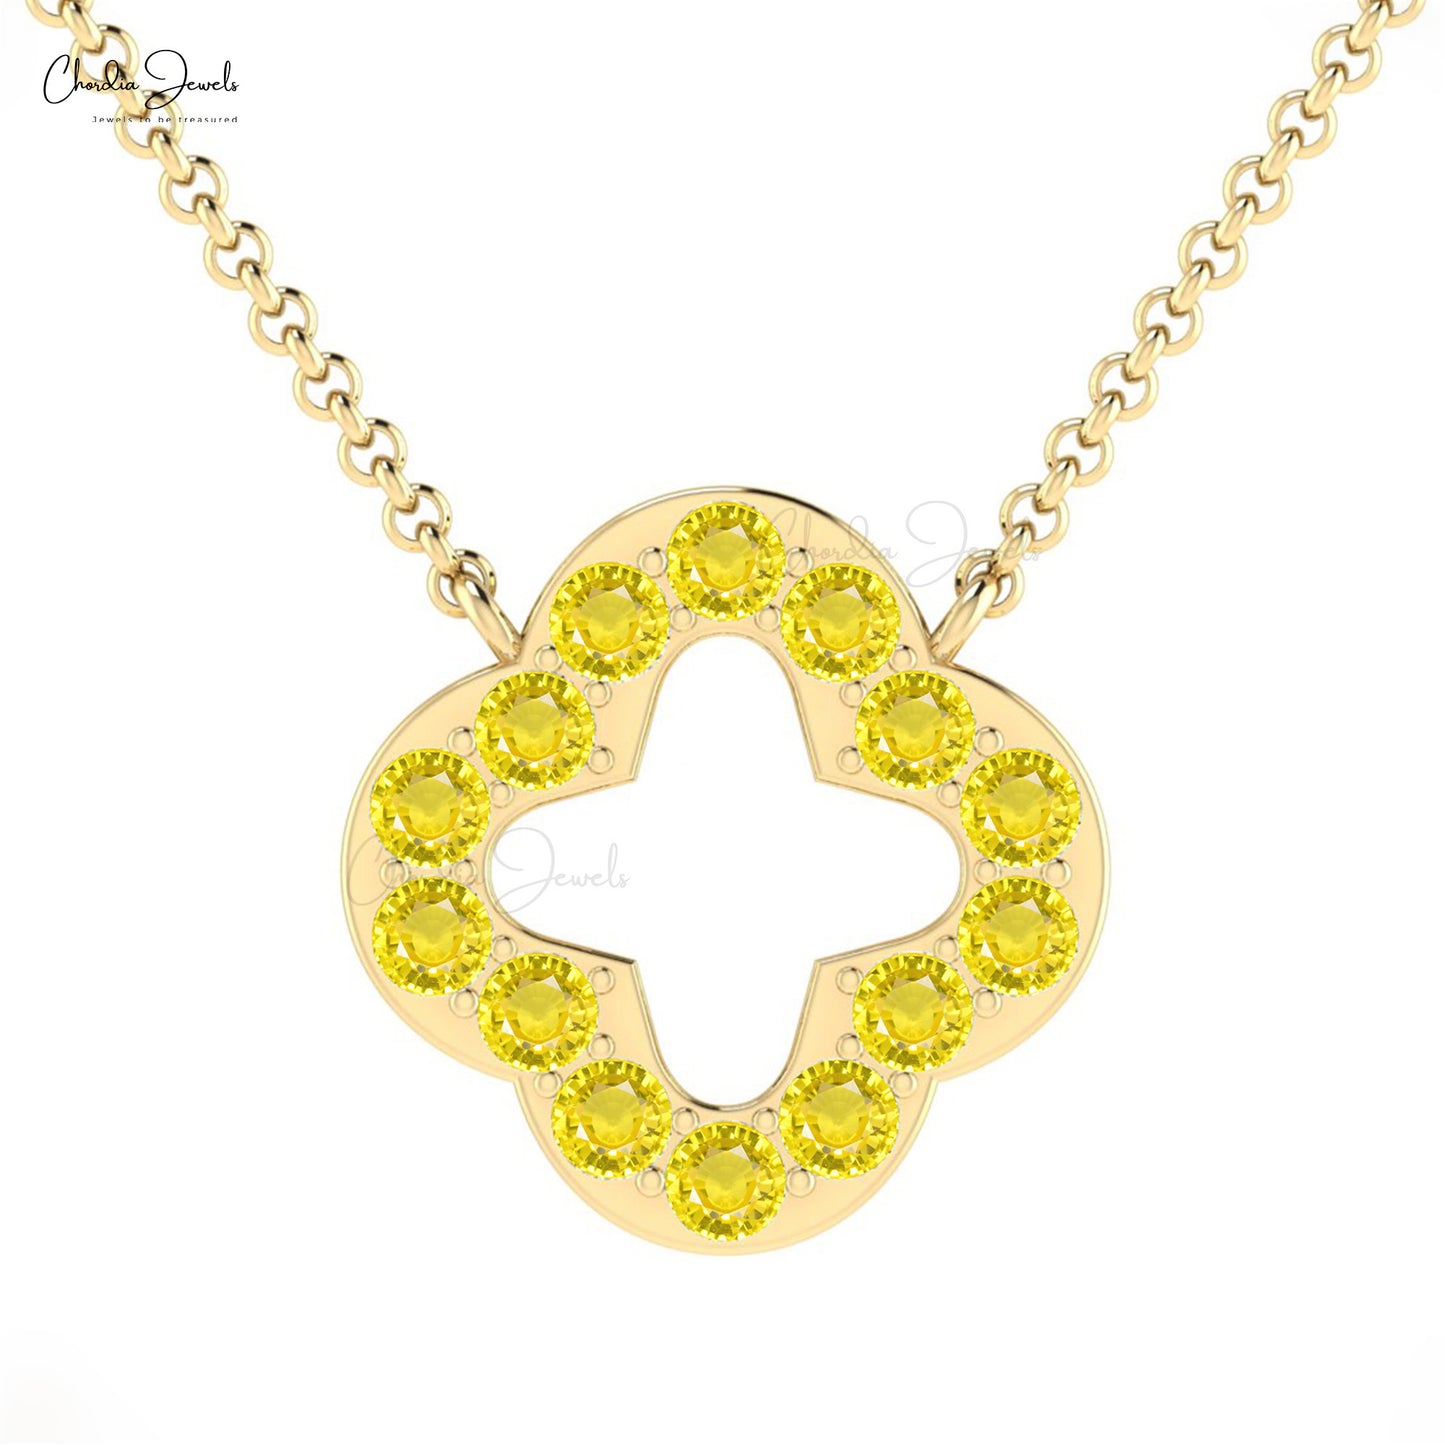 Hot Selling Exquisite Real 14k Gold Open Clover Necklace Pendant Genuine Yellow Sapphire Gemstone Beaded Necklace Anniversary Gift For Women